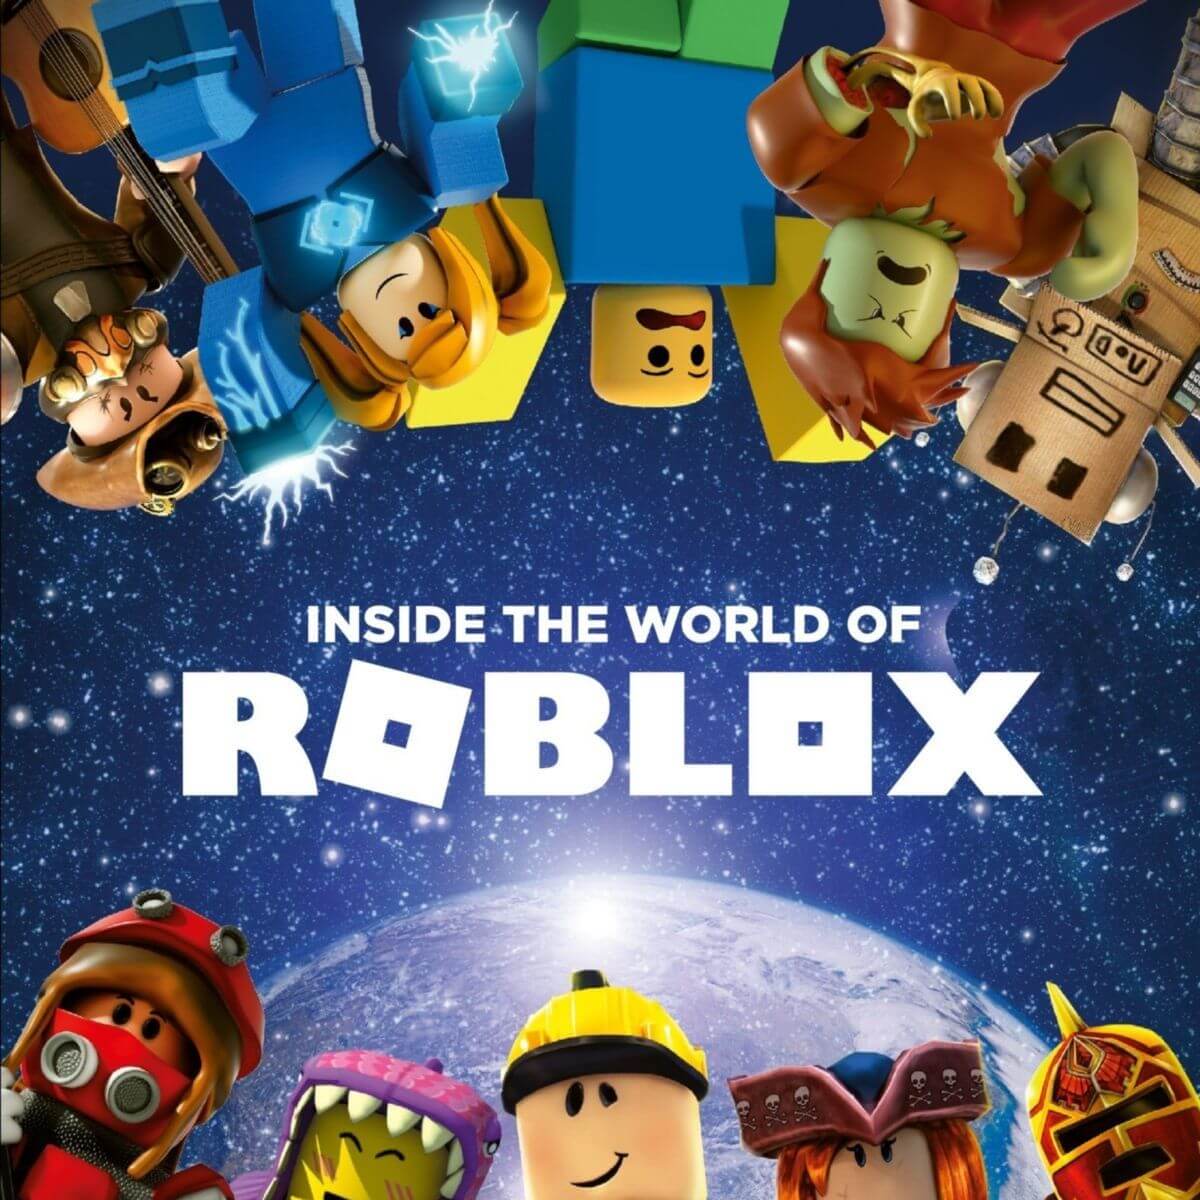 Roblox Background For Chrome